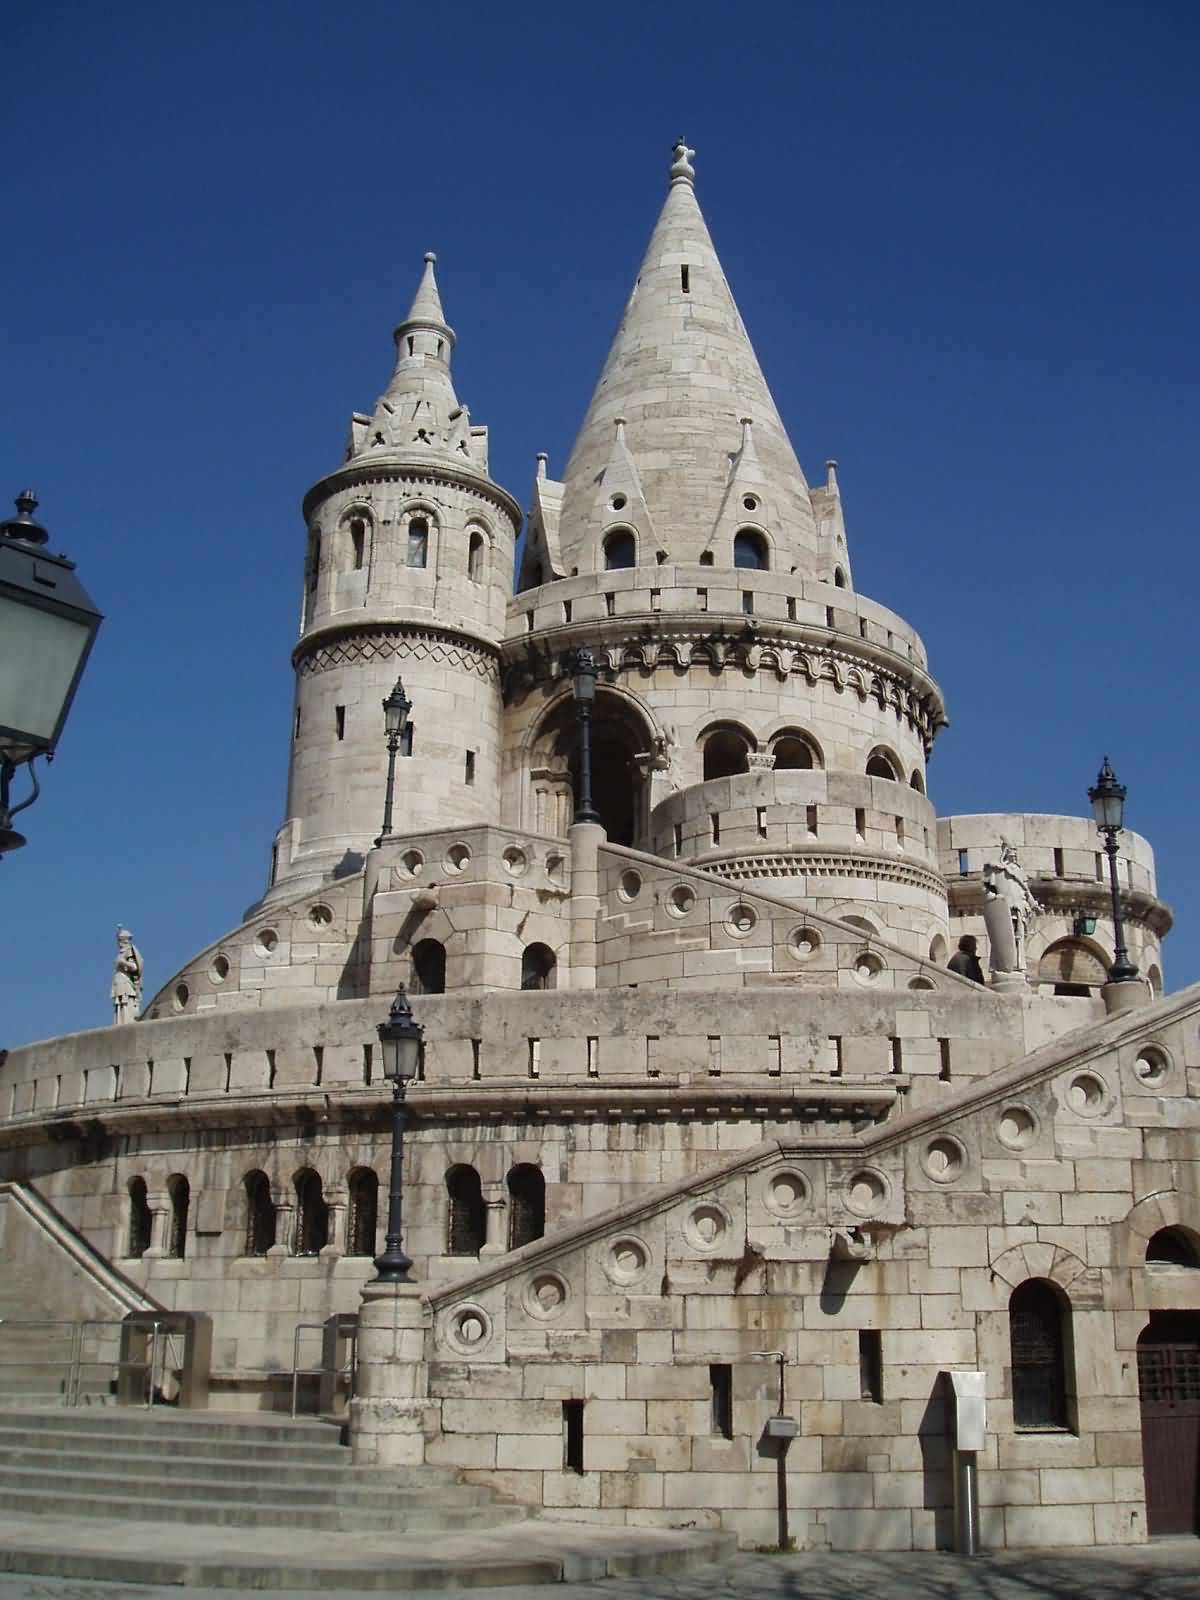 Amazing Picture Of The Fisherman’s Bastion